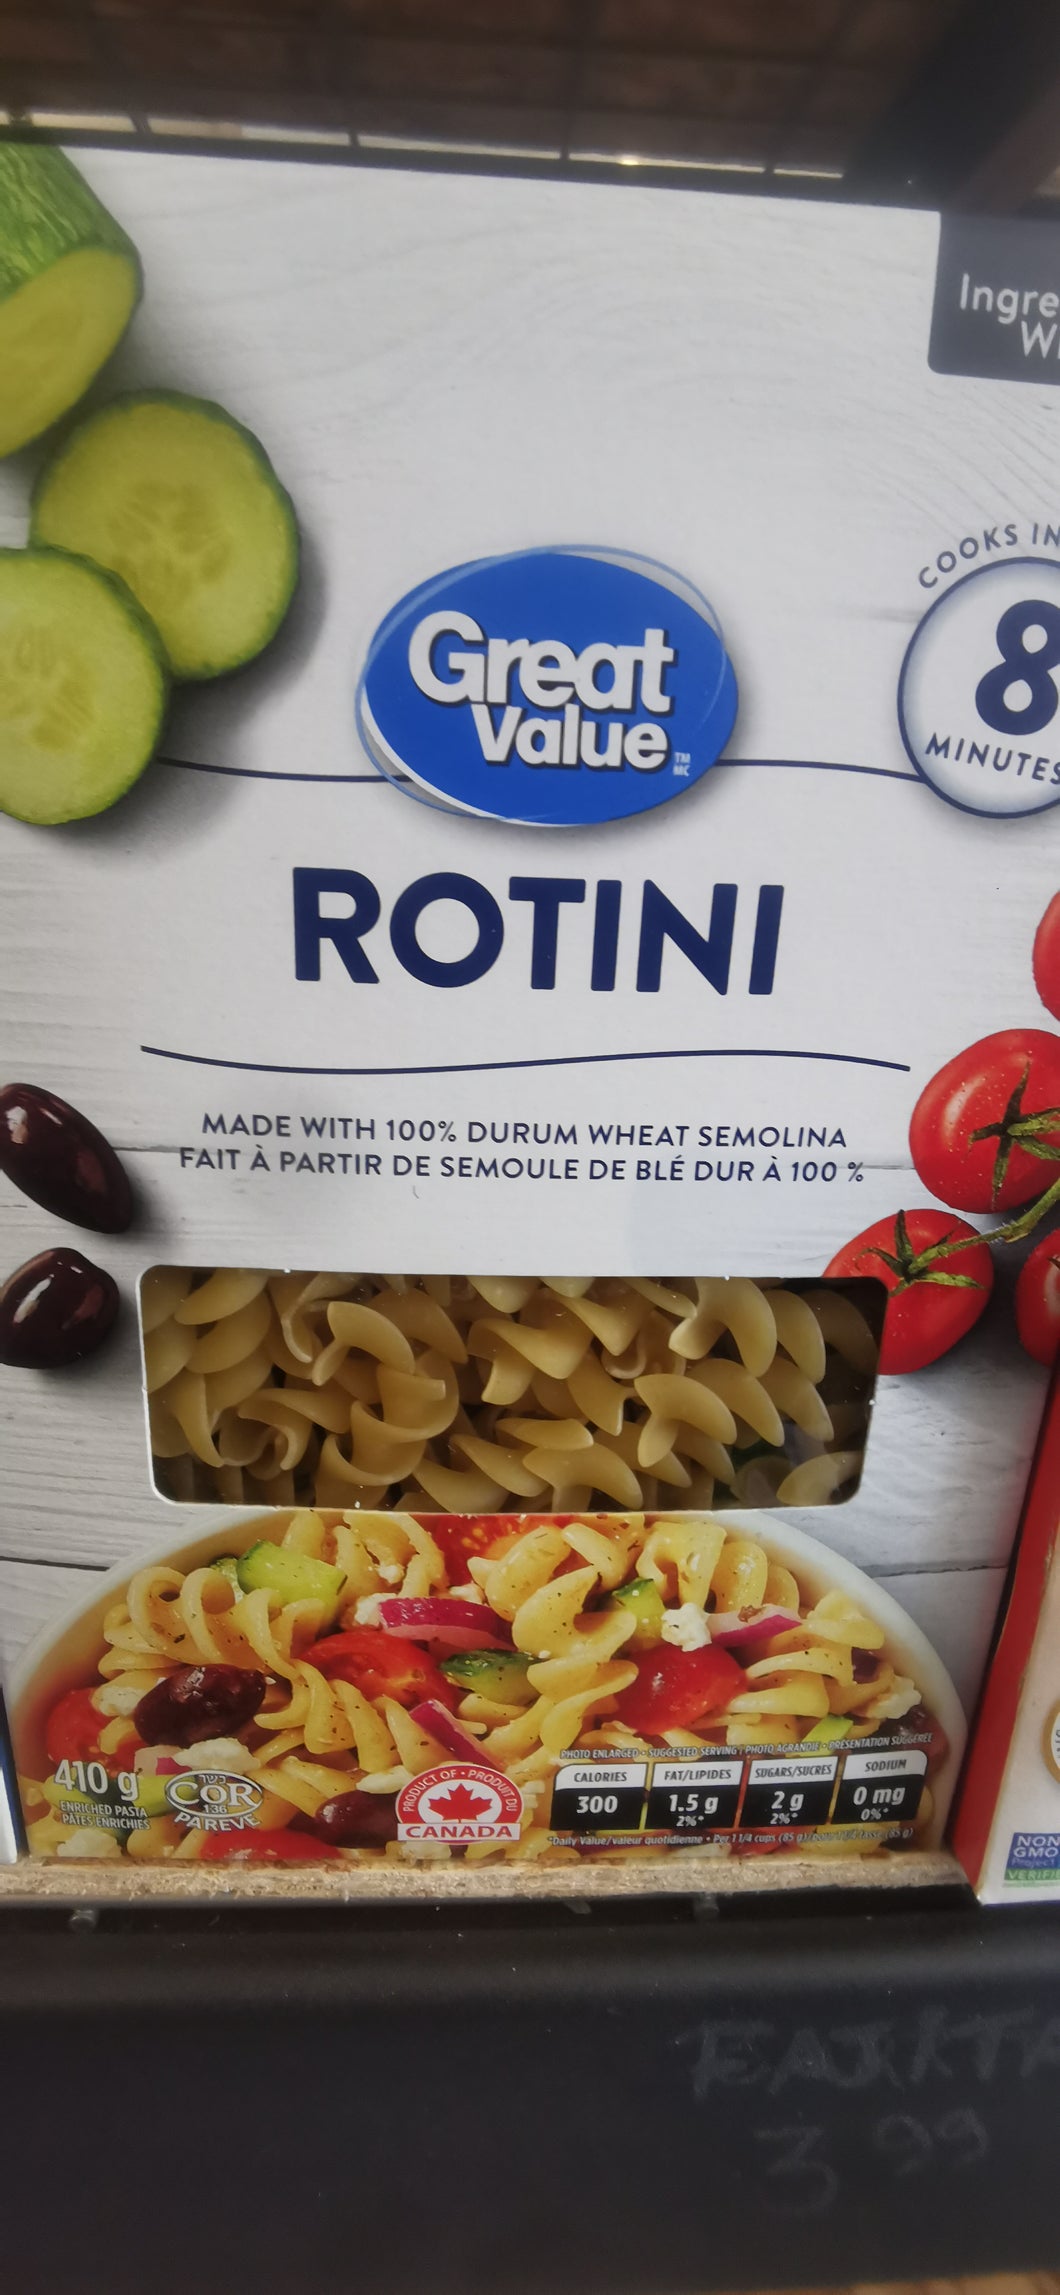 GREAT VALUE- PENNE RIGATE - 410g